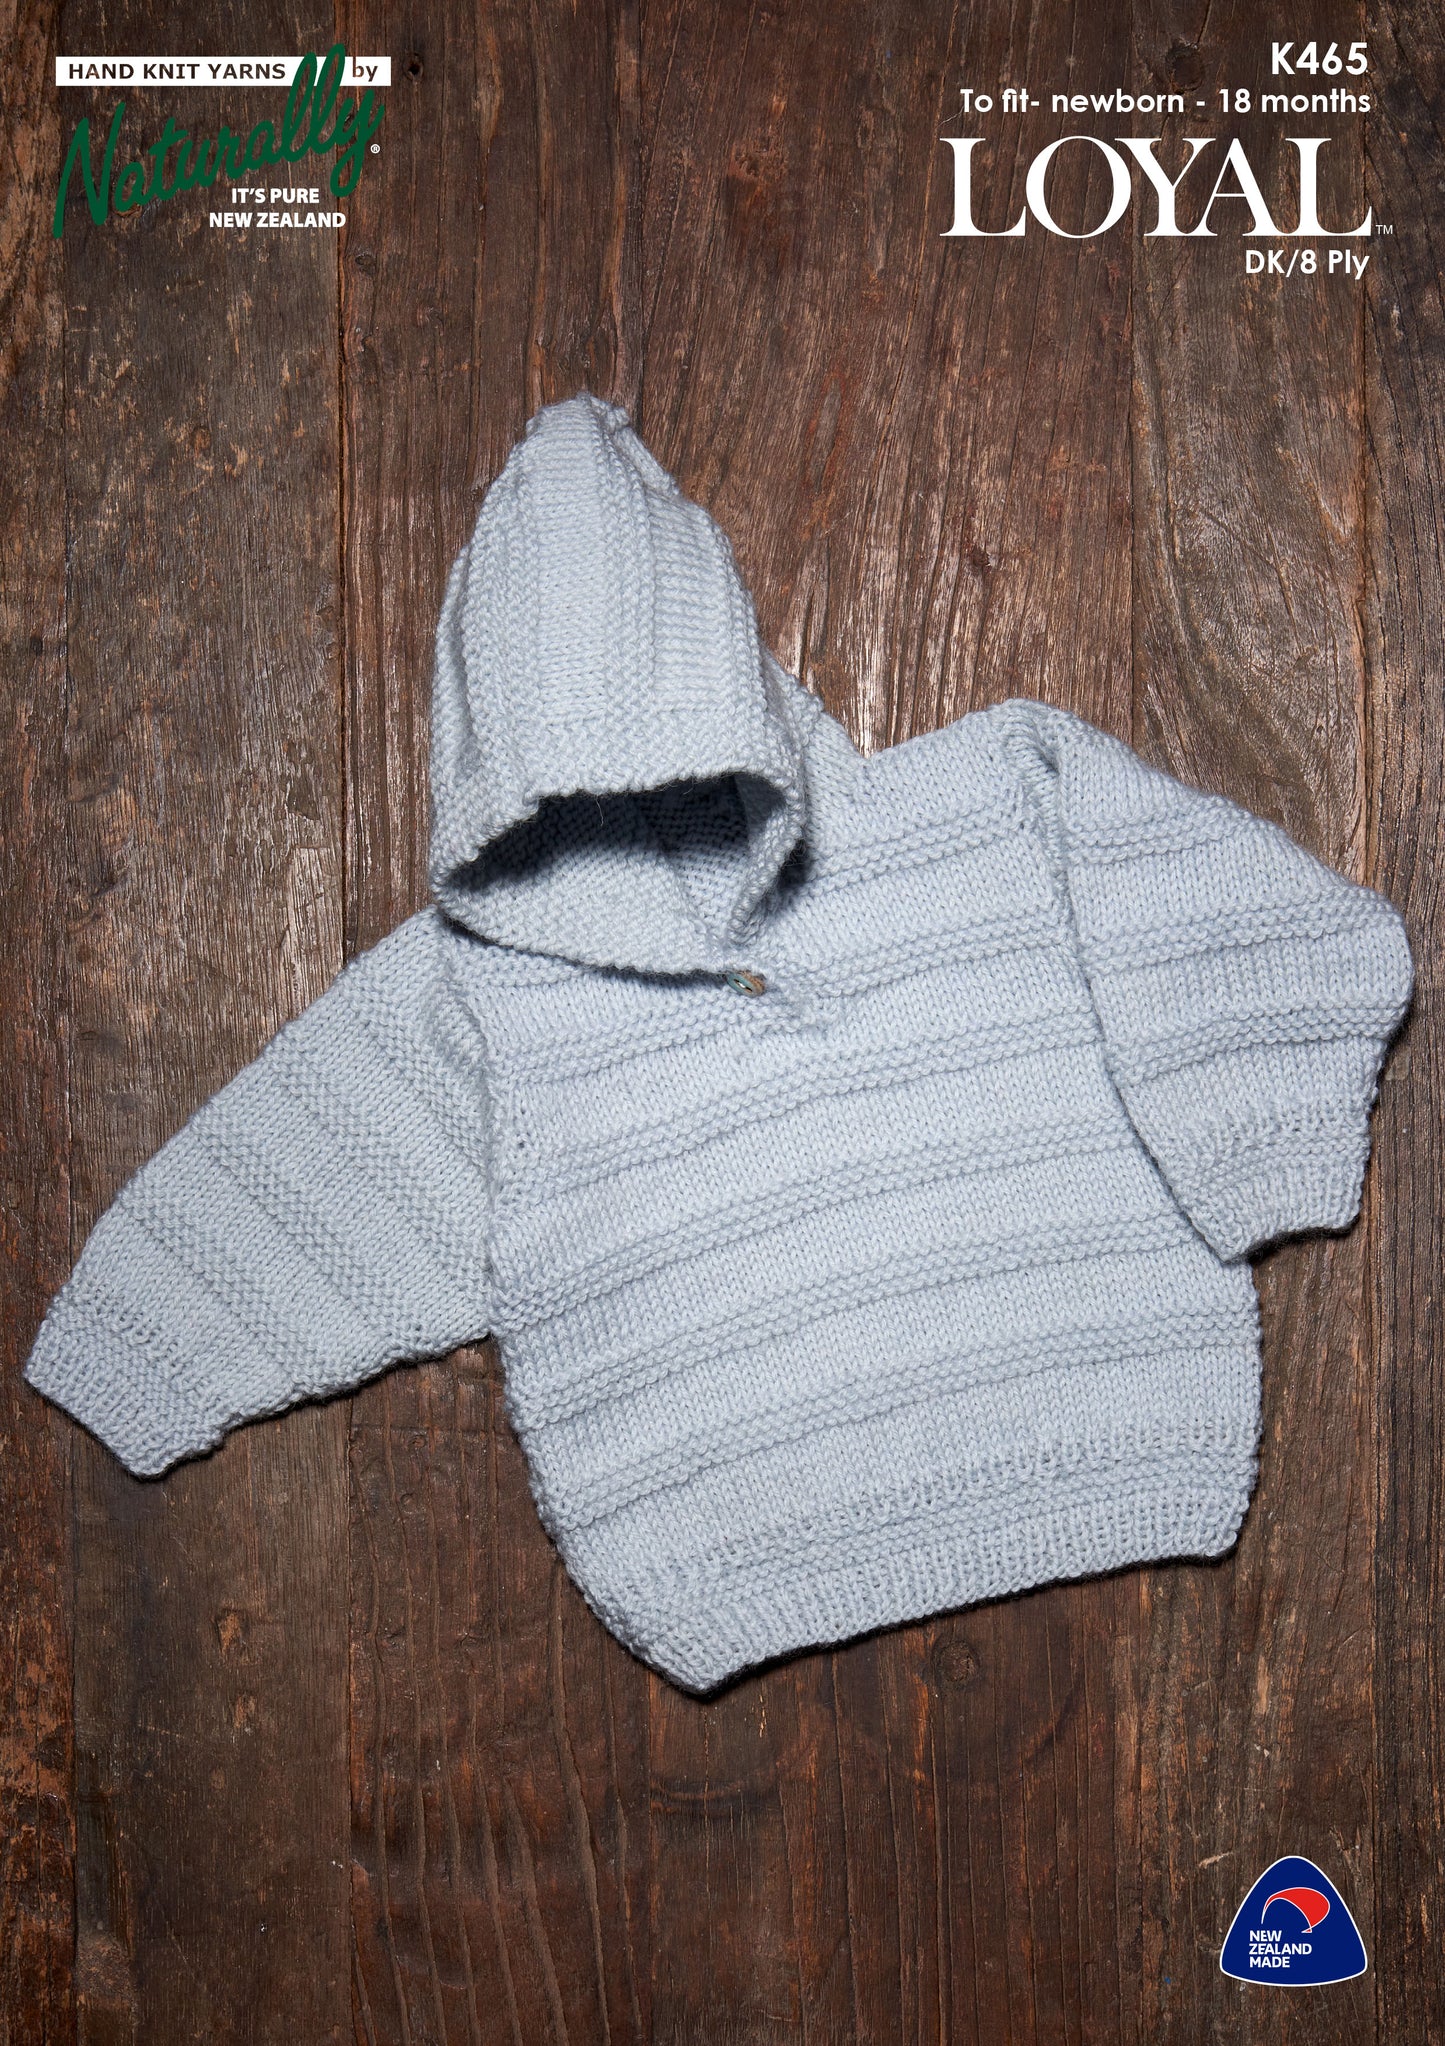 Pattern - Naturally - Newborn to 18 months - Hooded Sweater K465